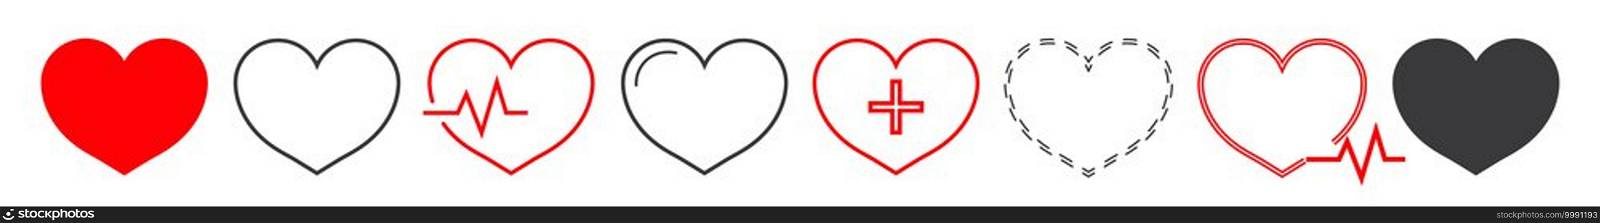 Heart icon. Outline shape for love and health. Graphic medical symbol. Set of red and black hearts. Linear cardio signs isolated on white background for valentine, life and ecg. Vector.. Heart icon. Outline shape for love and health. Graphic medical symbol. Set of red and black hearts. Linear cardio signs isolated on white background for valentine, life and ecg. Vector